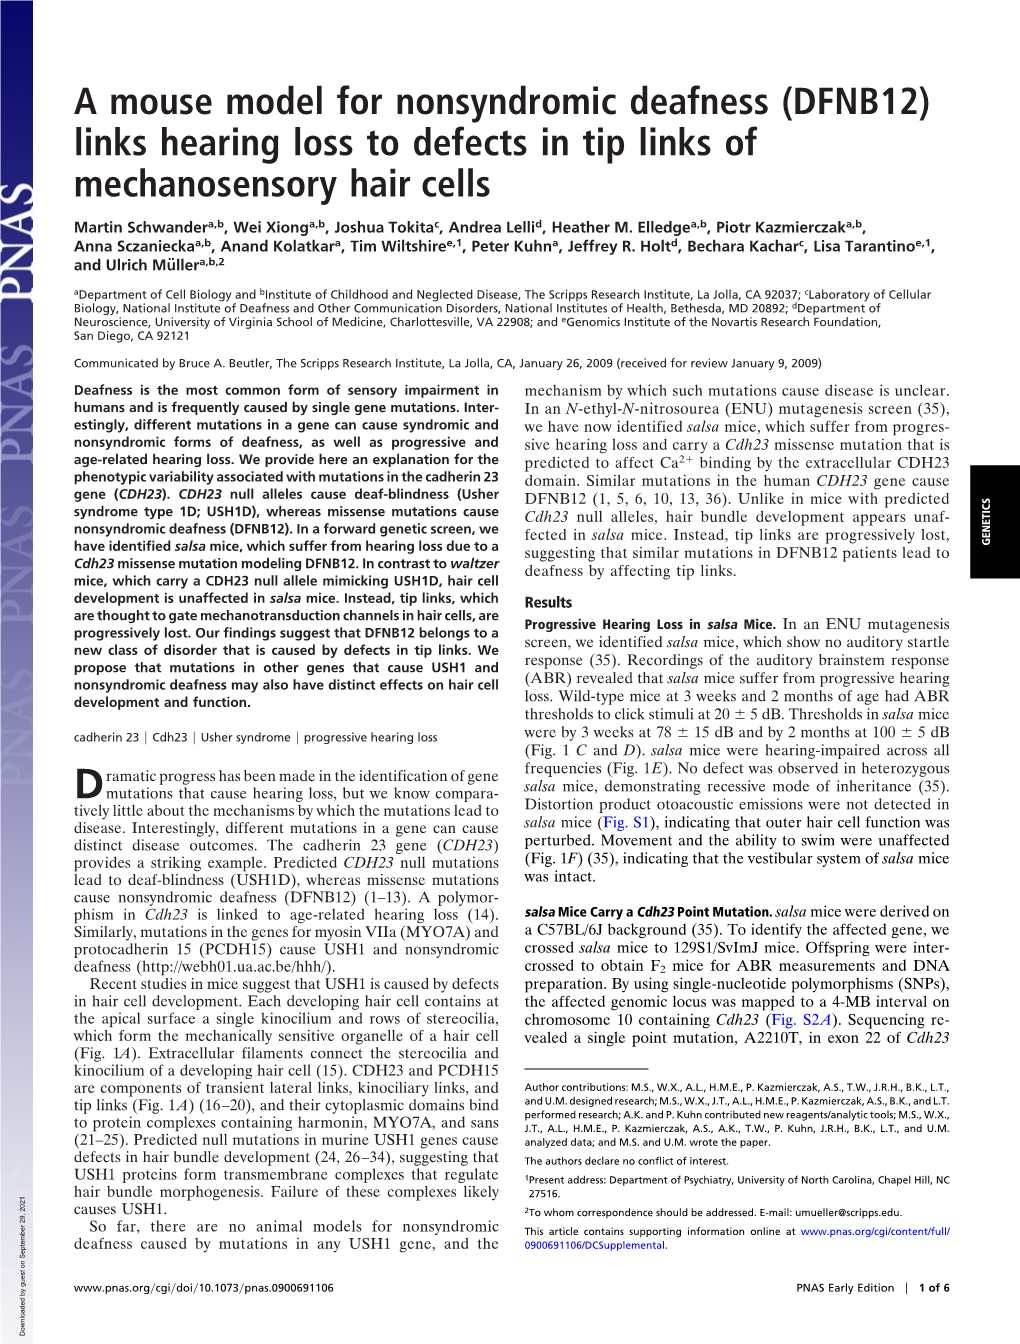 A Mouse Model for Nonsyndromic Deafness (DFNB12) Links Hearing Loss to Defects in Tip Links of Mechanosensory Hair Cells